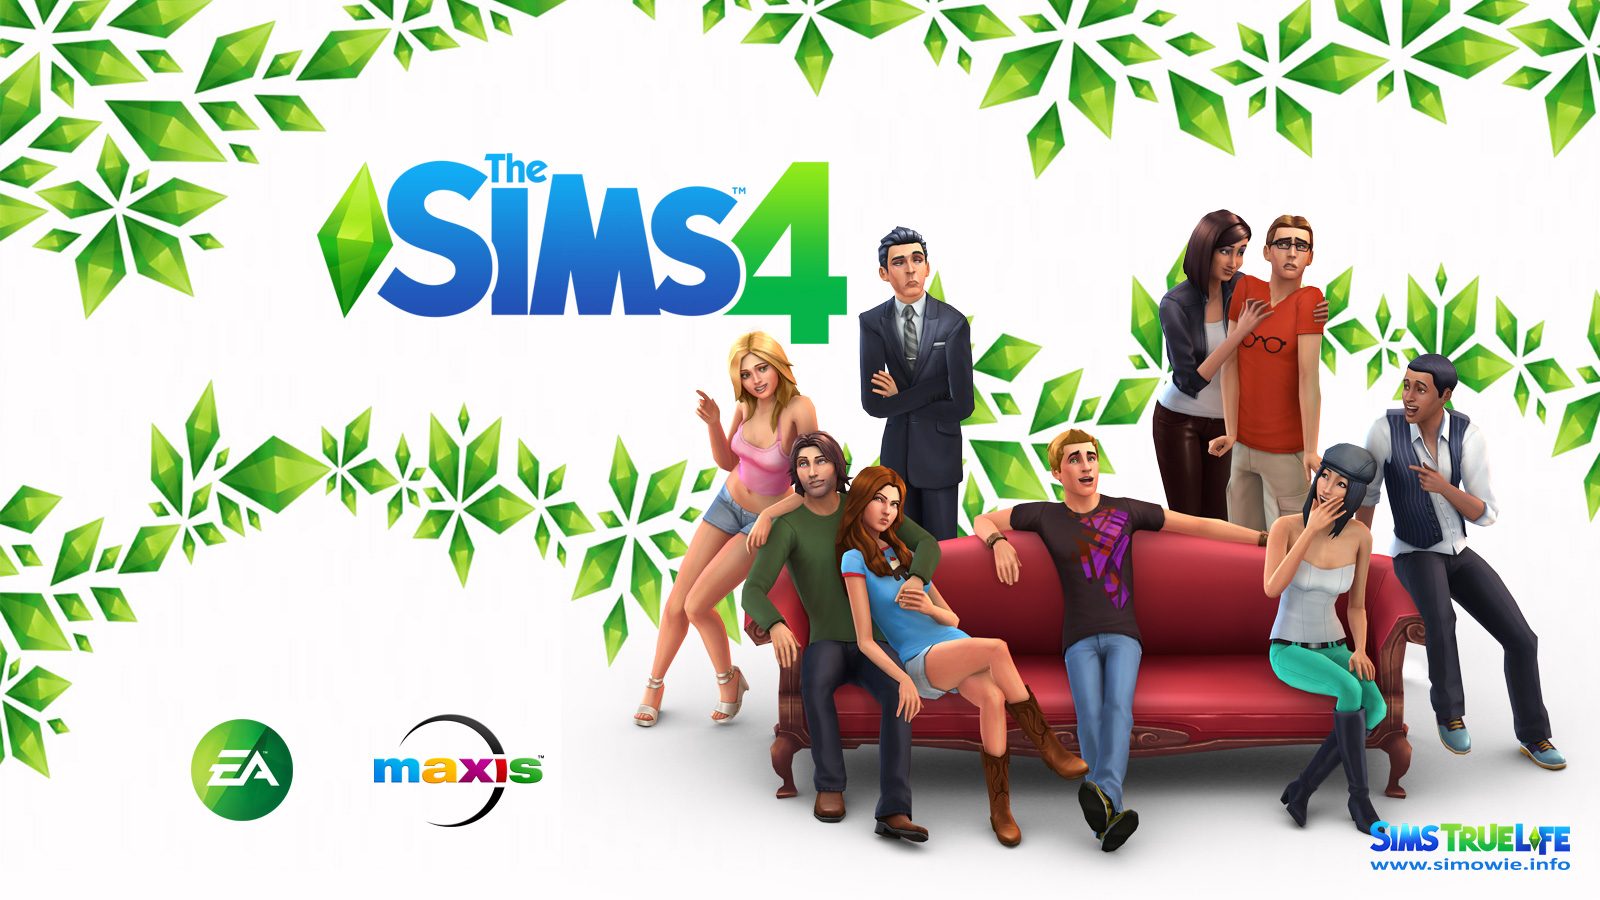 The Sims 4 Wallpaper Cc 86 images